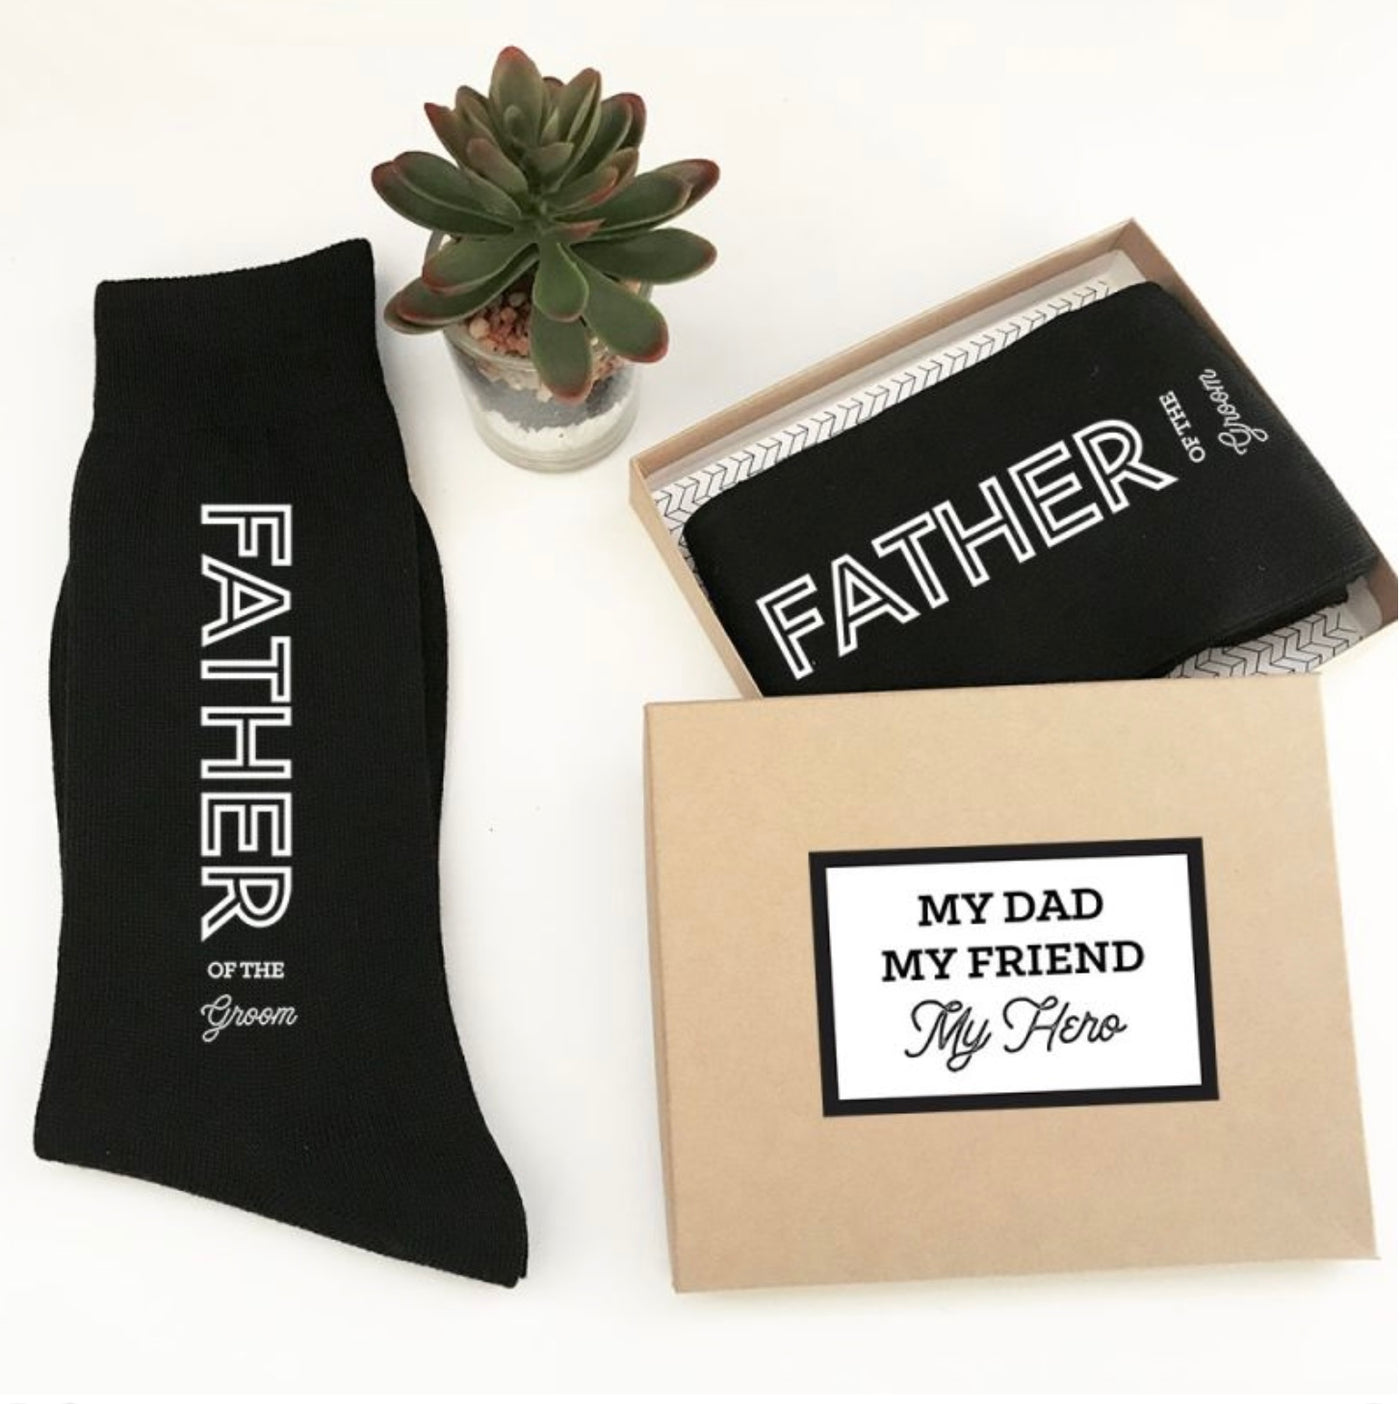 Father of the Groom socks